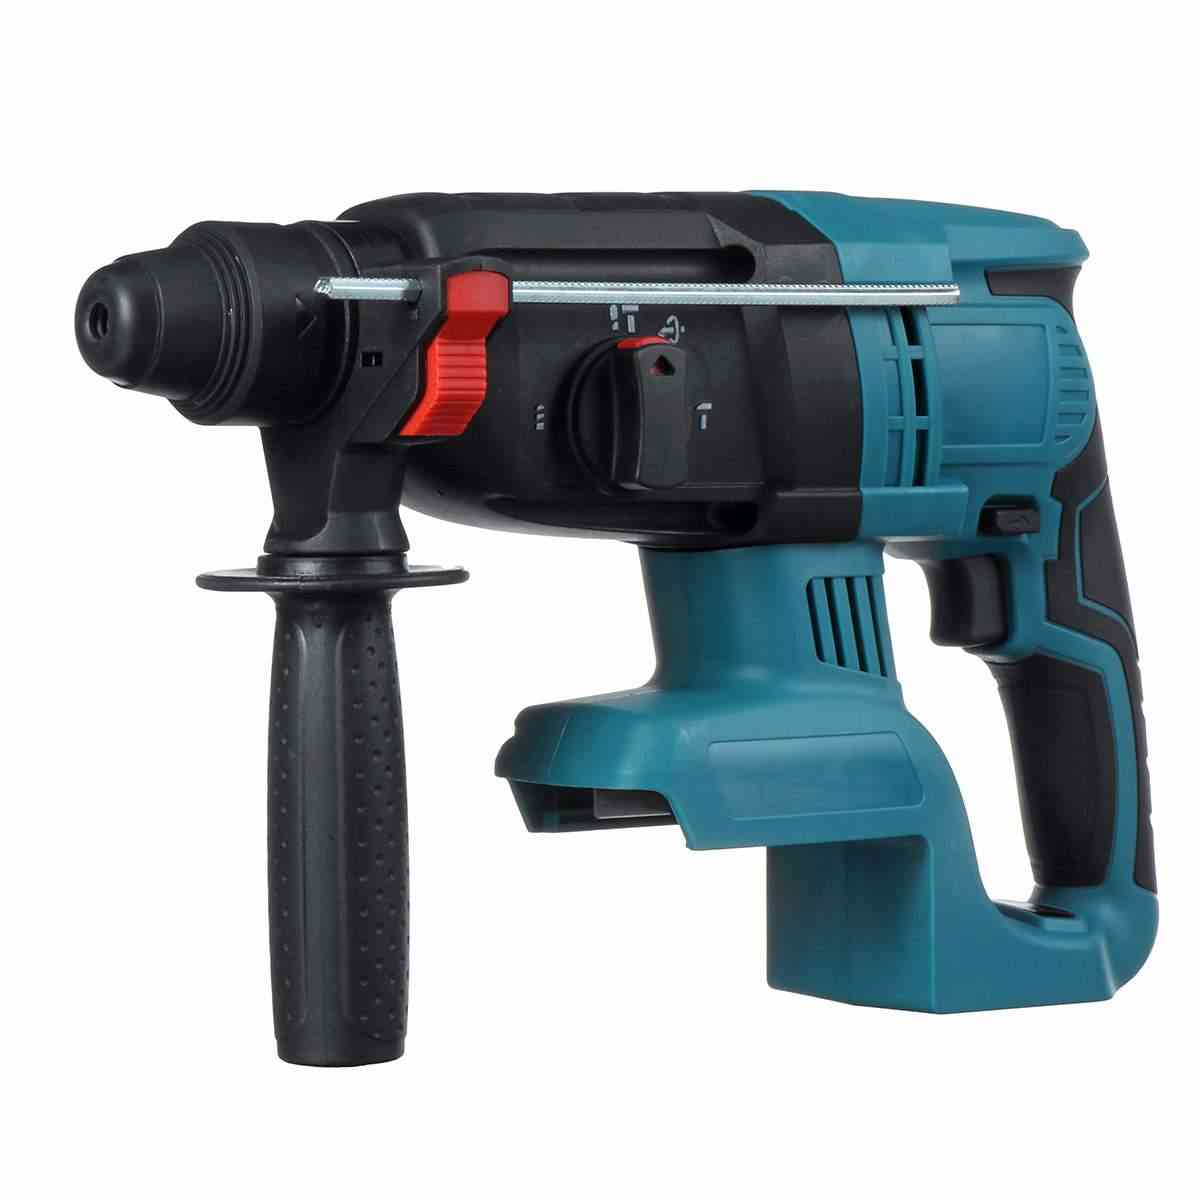 4 Functions Electric Rotary Hammer Drill Rechargeable